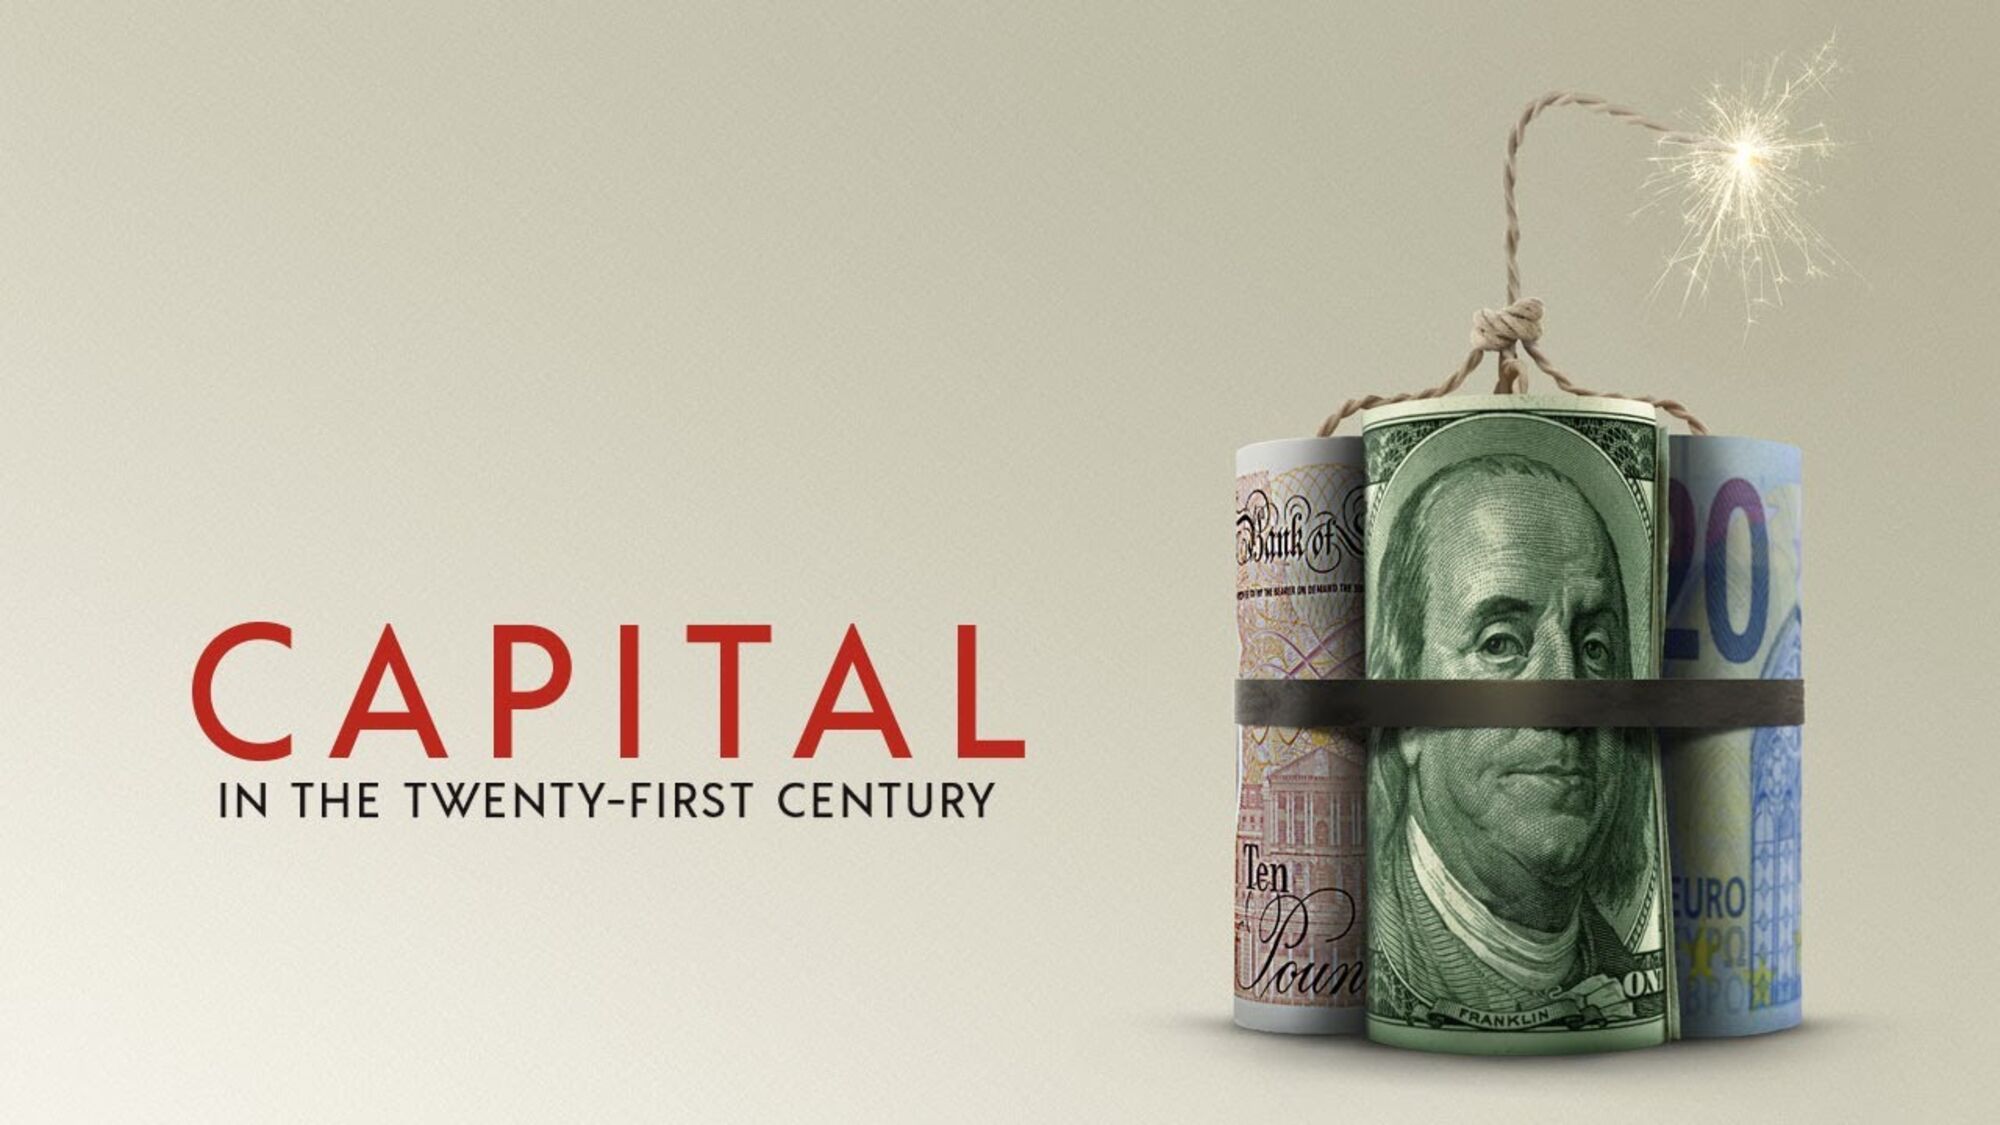 A Quick Overview of Capital in the Twenty-First Century